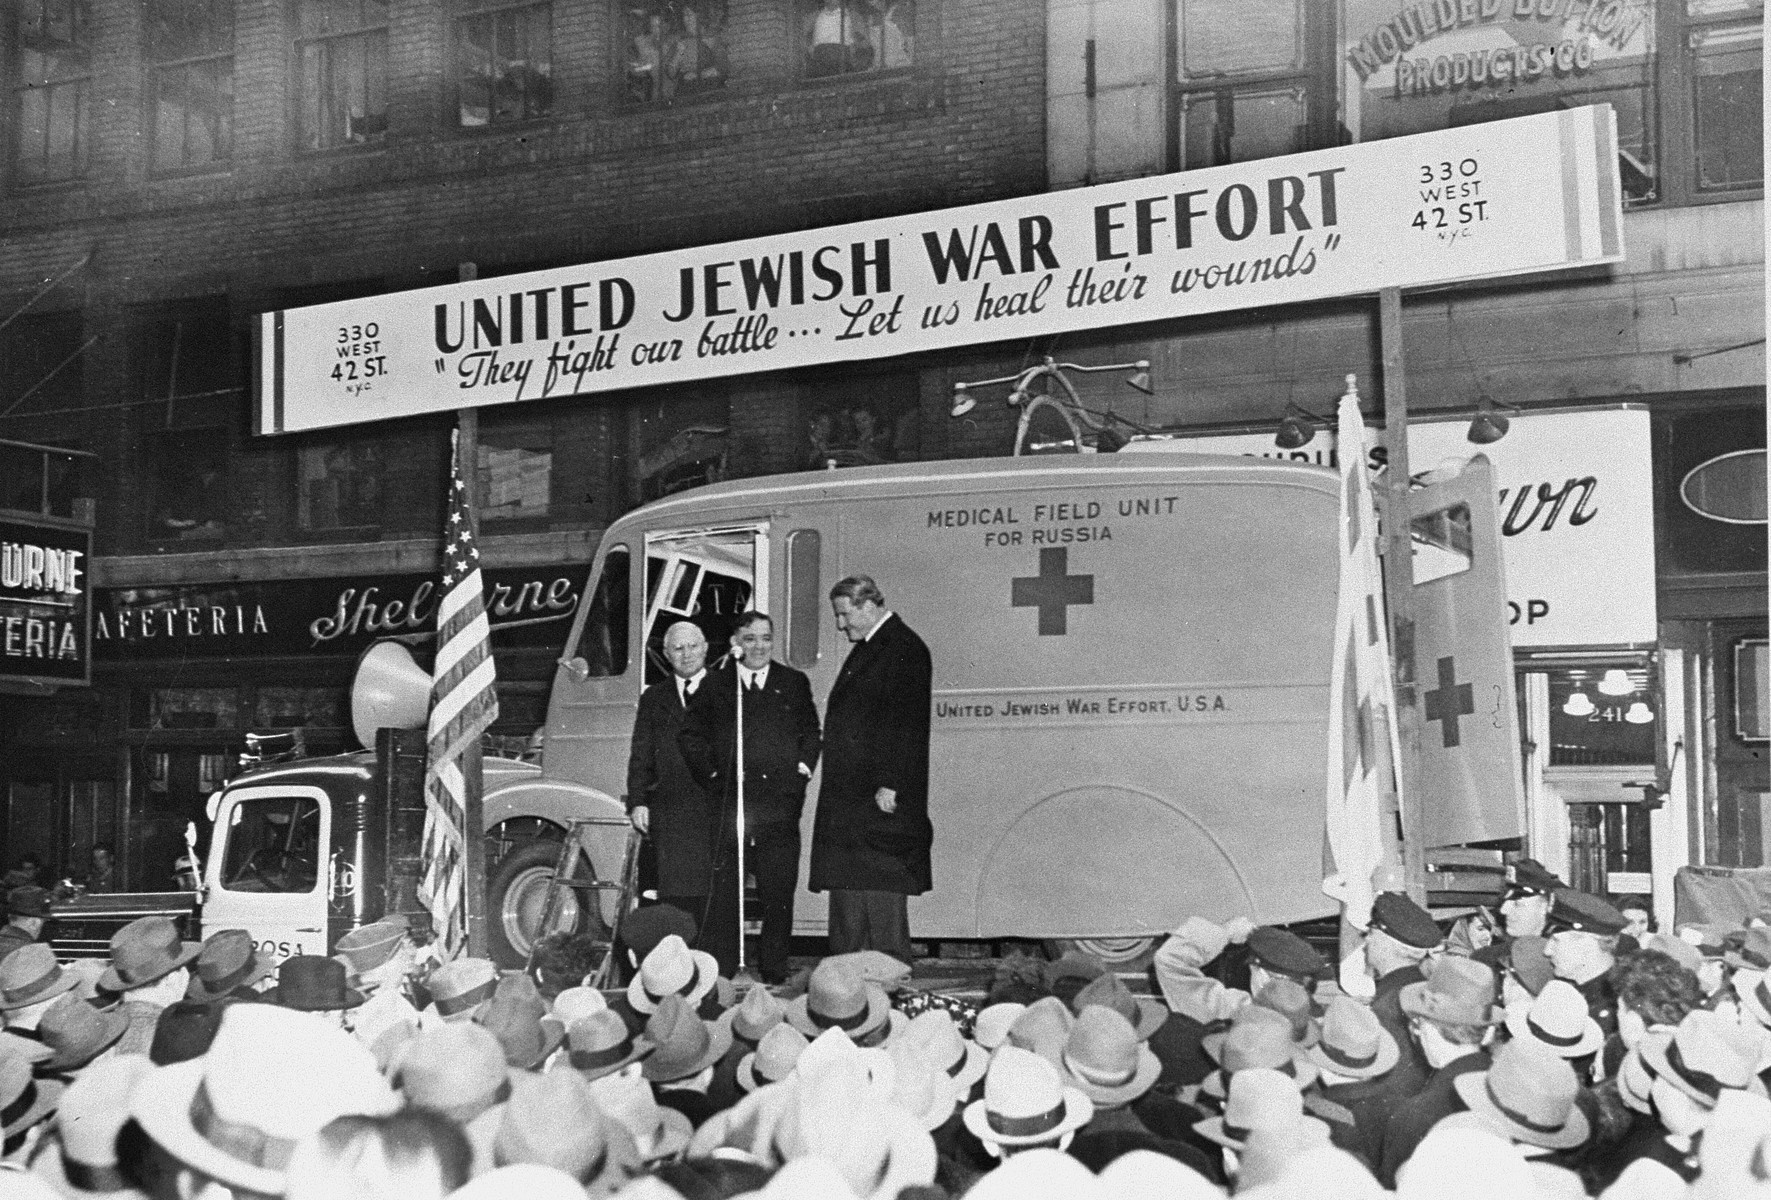 Dr. Joseph Tenenbaum stands with Fiorello LaGuardia and Rabbi Stephen S. Wise in front of a medical field unit sponsored by the United Jewish War Effort that is being sent to the Soviet Union.